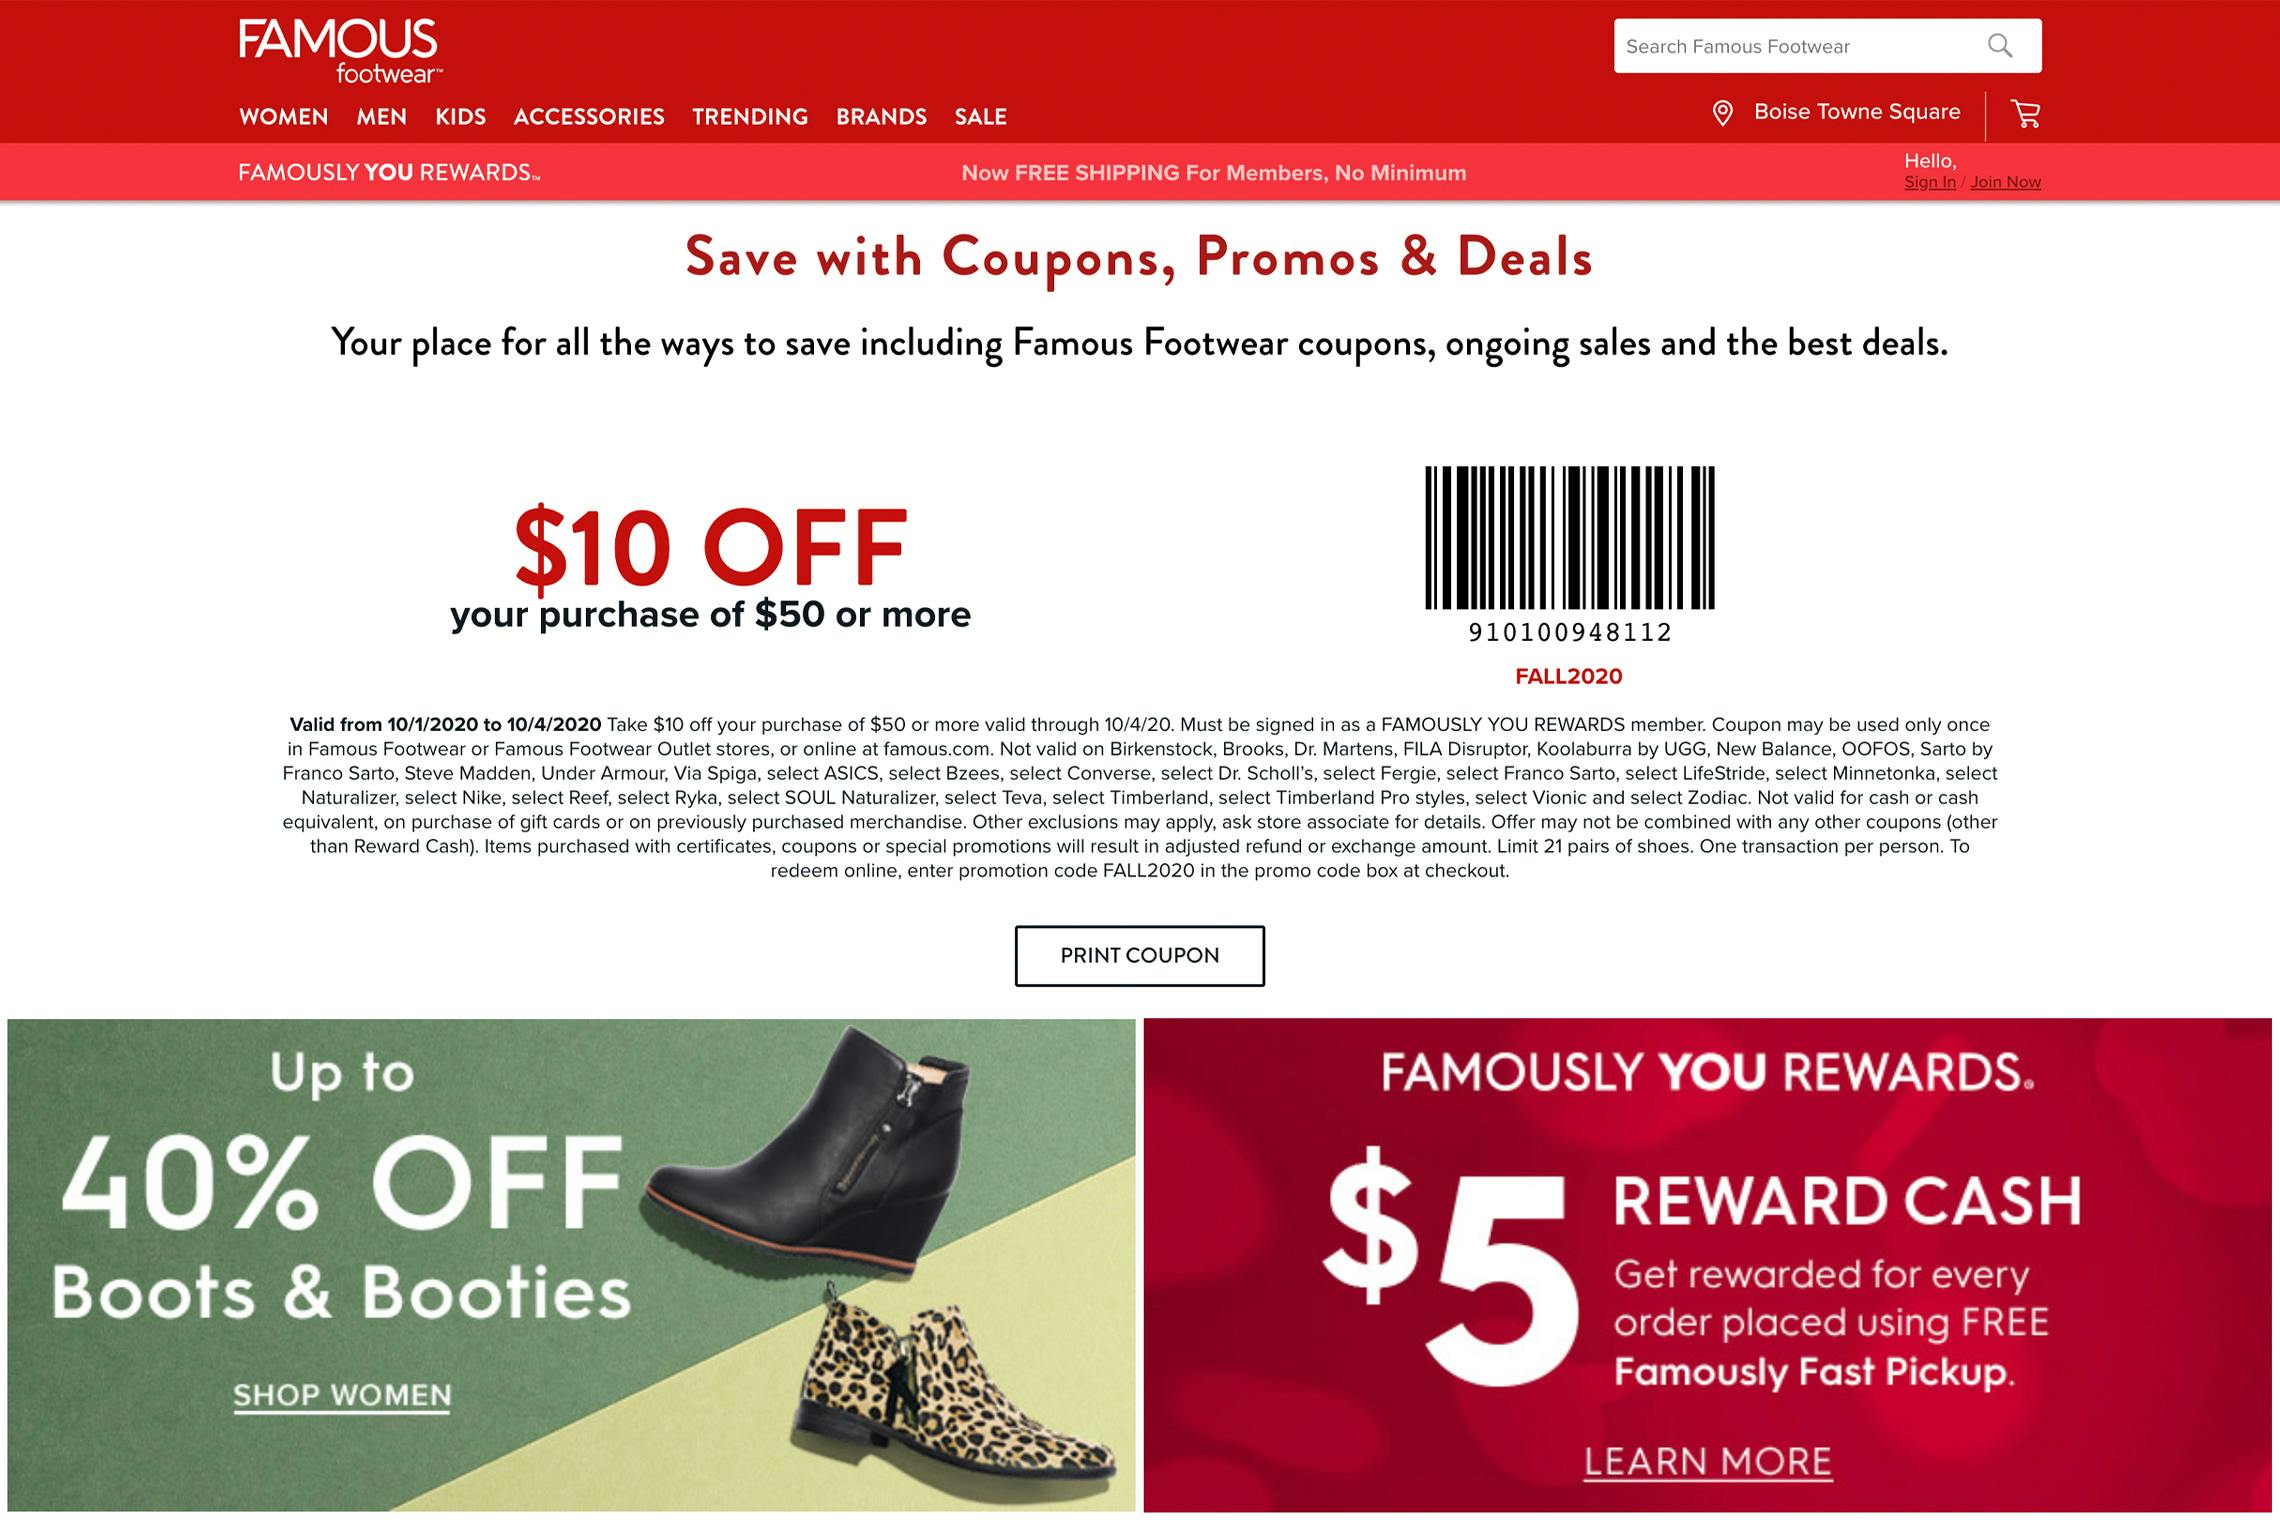 16-famous-footwear-coupons-and-tricks-for-deals-on-kicks-the-krazy